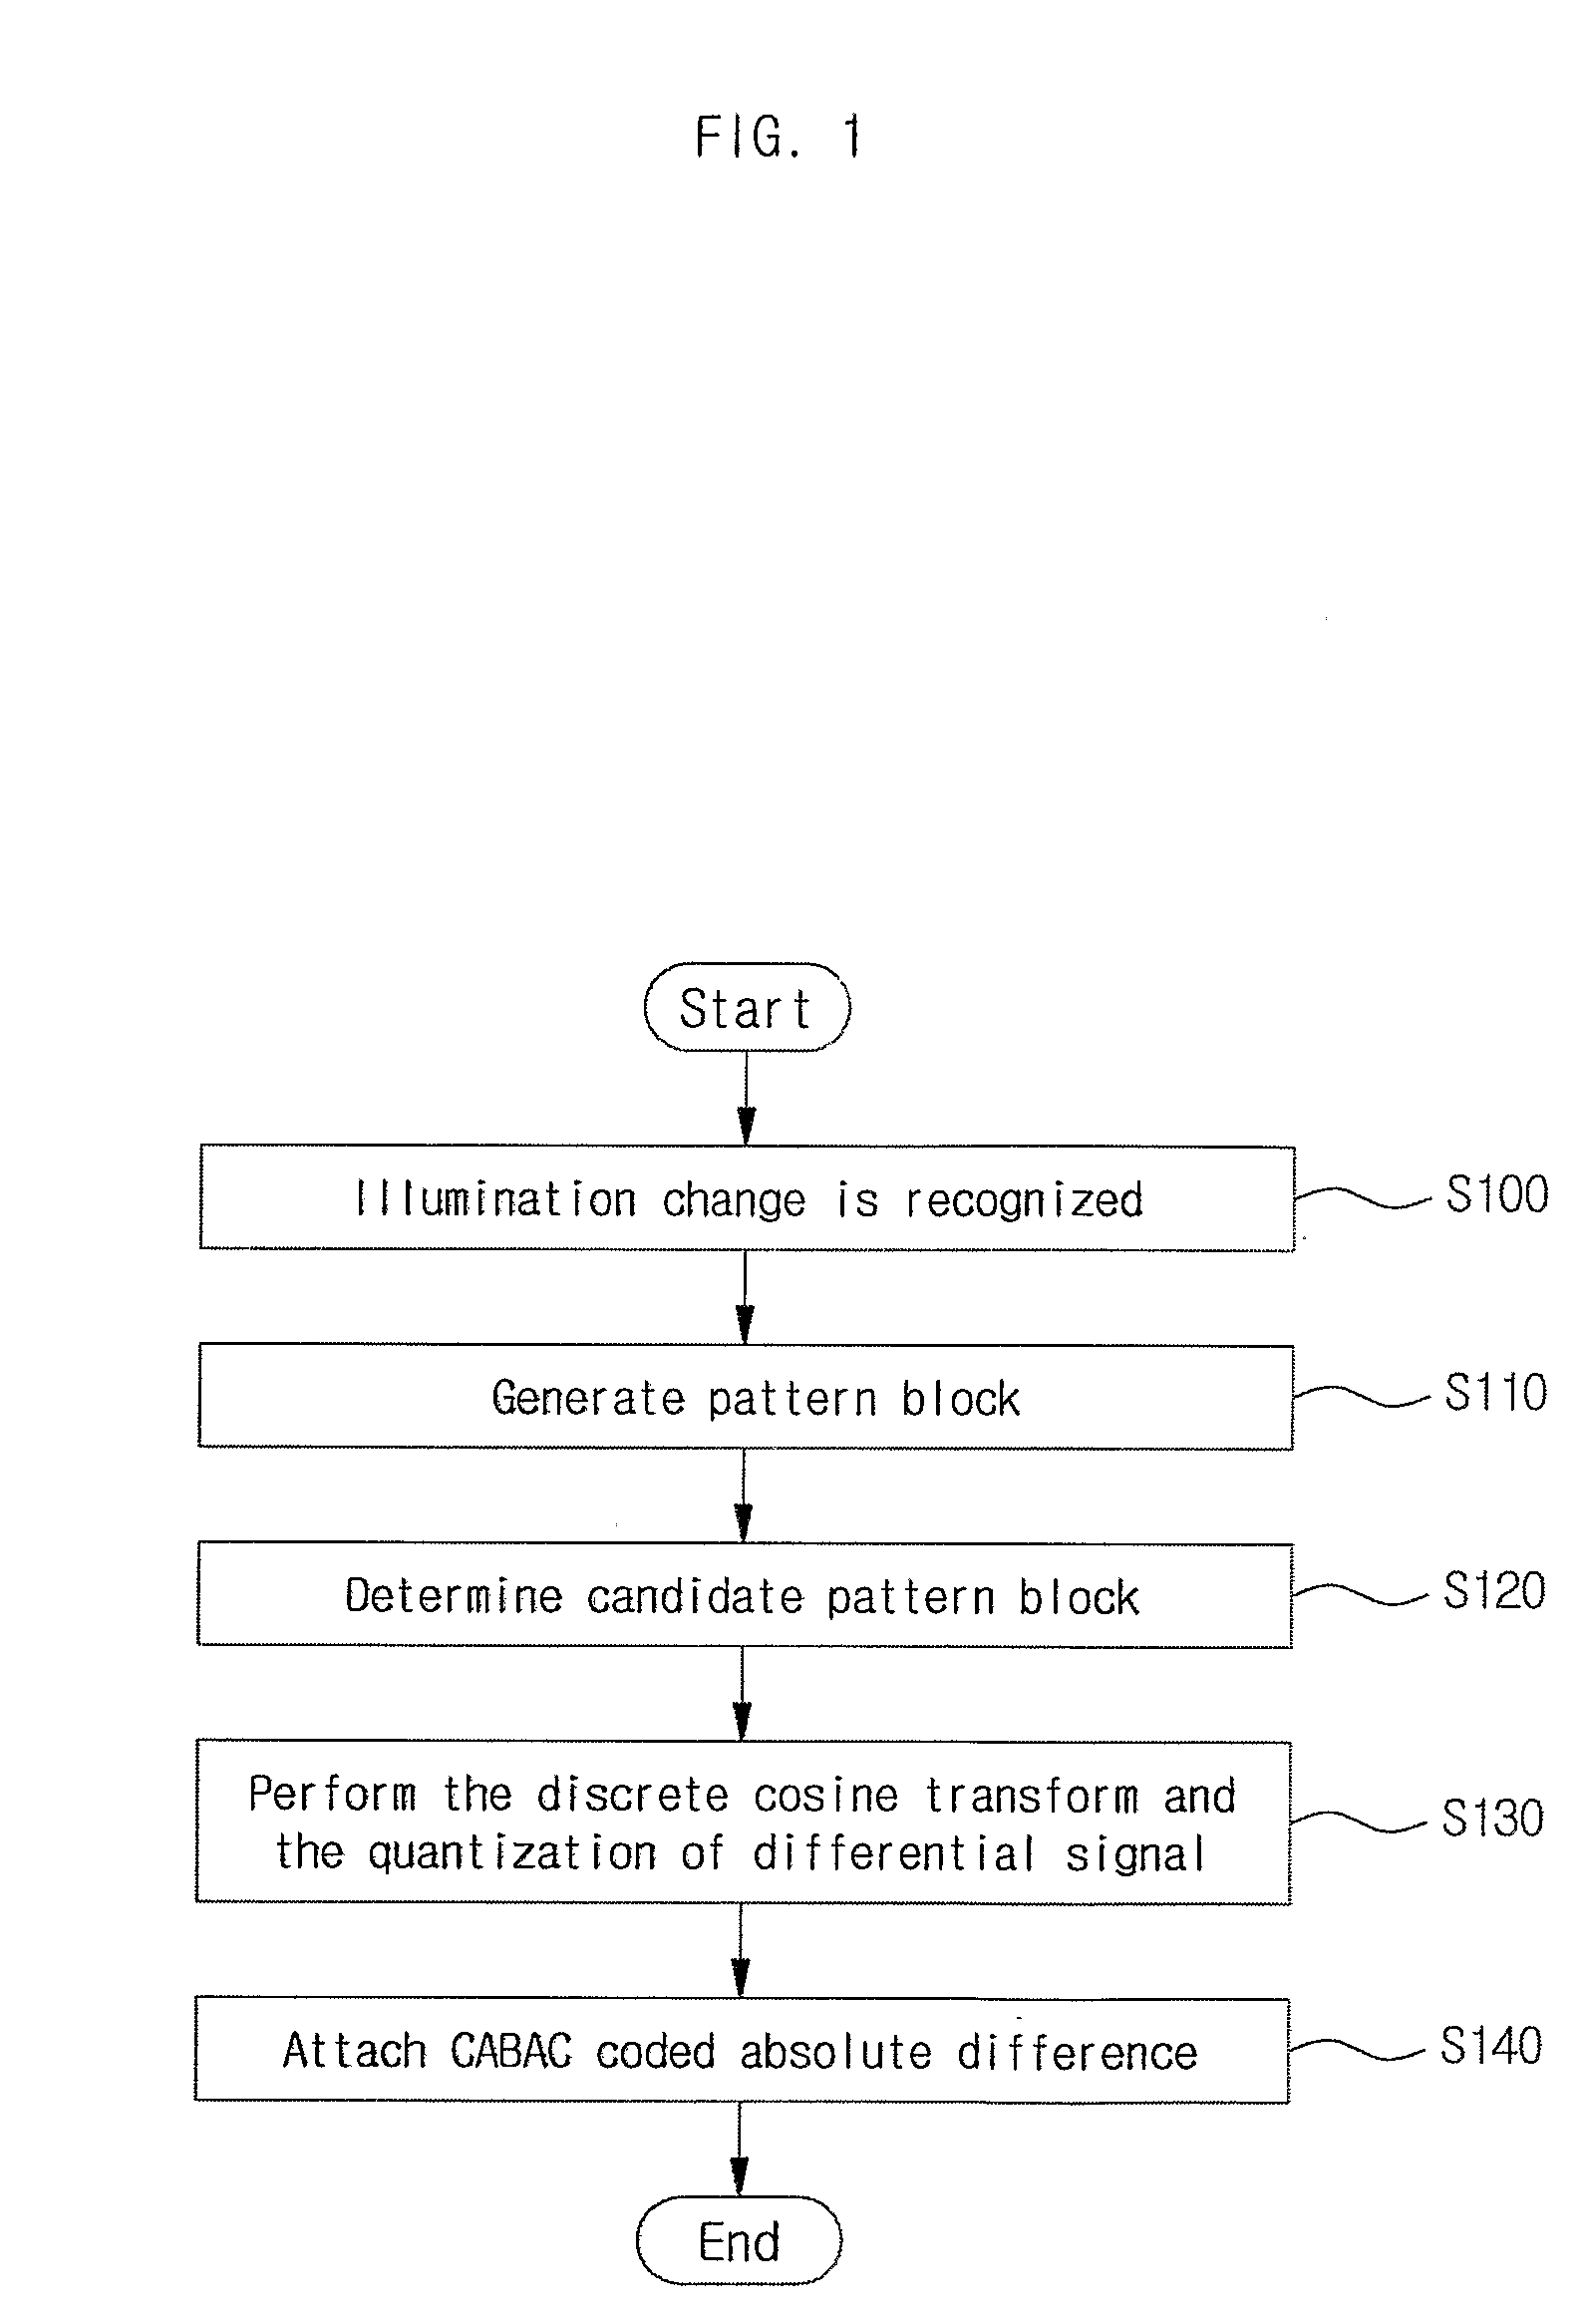 Estimation/Compensation Device for Mb/Based Illumination Change and Method Thereof